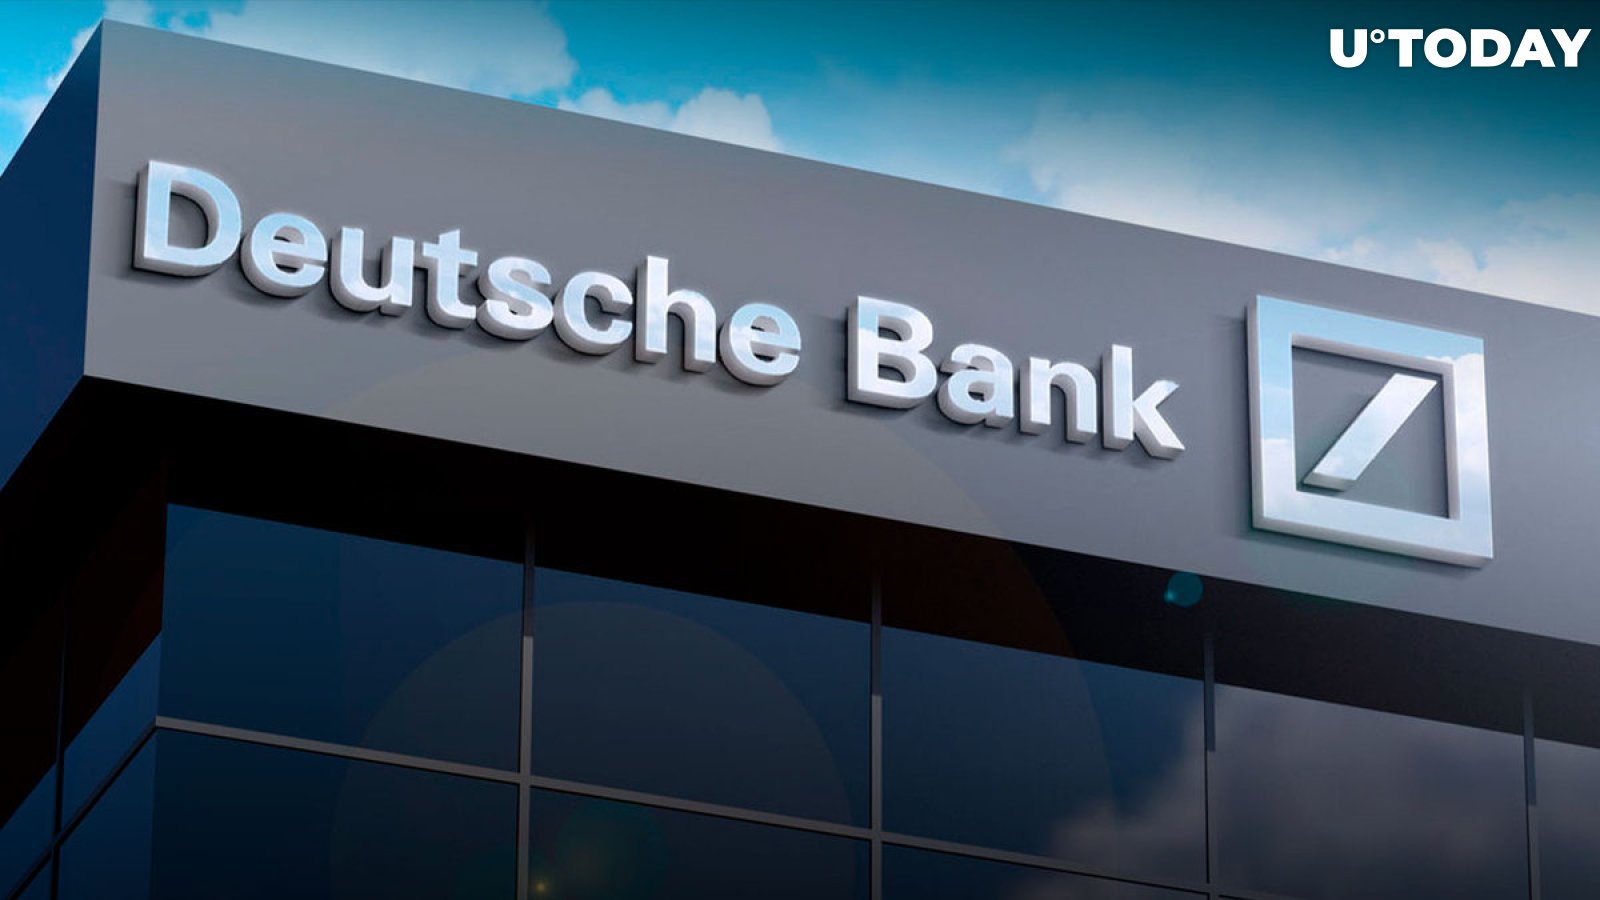 Deutsche Bank issues major warning on stablecoins